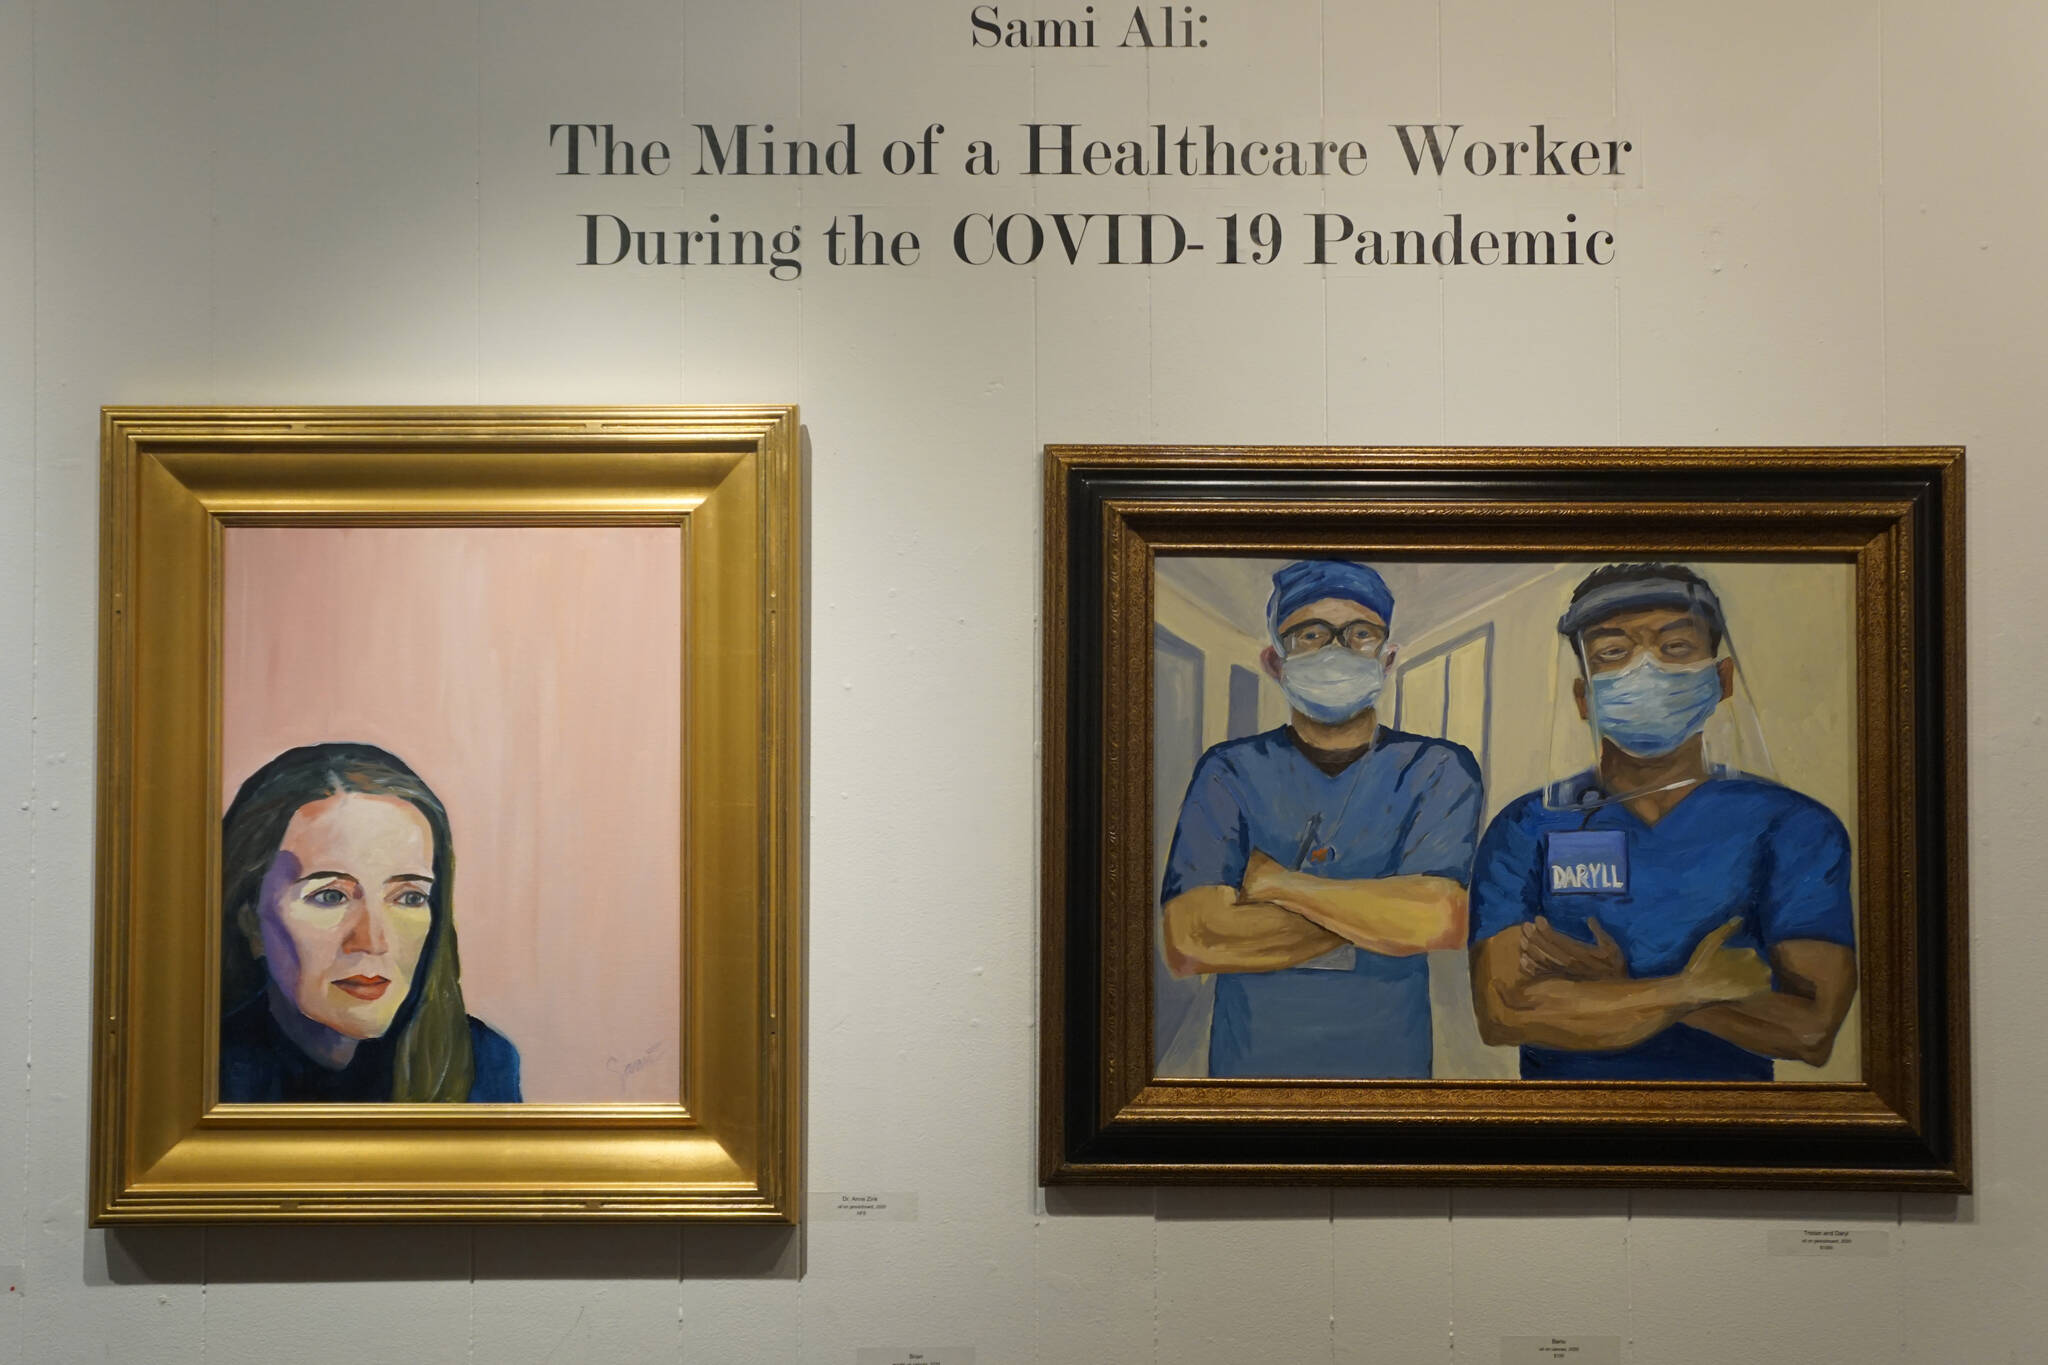 Two paintings in in Dr. Sami Ali's exhibit, "The Mind of a Healthcare Worker During the COVID-19 Pandemic," showing in January 2022 at the Homer Council on the Arts in Homer, Alaska. (Photo by Michael Armstrong/Homer News)